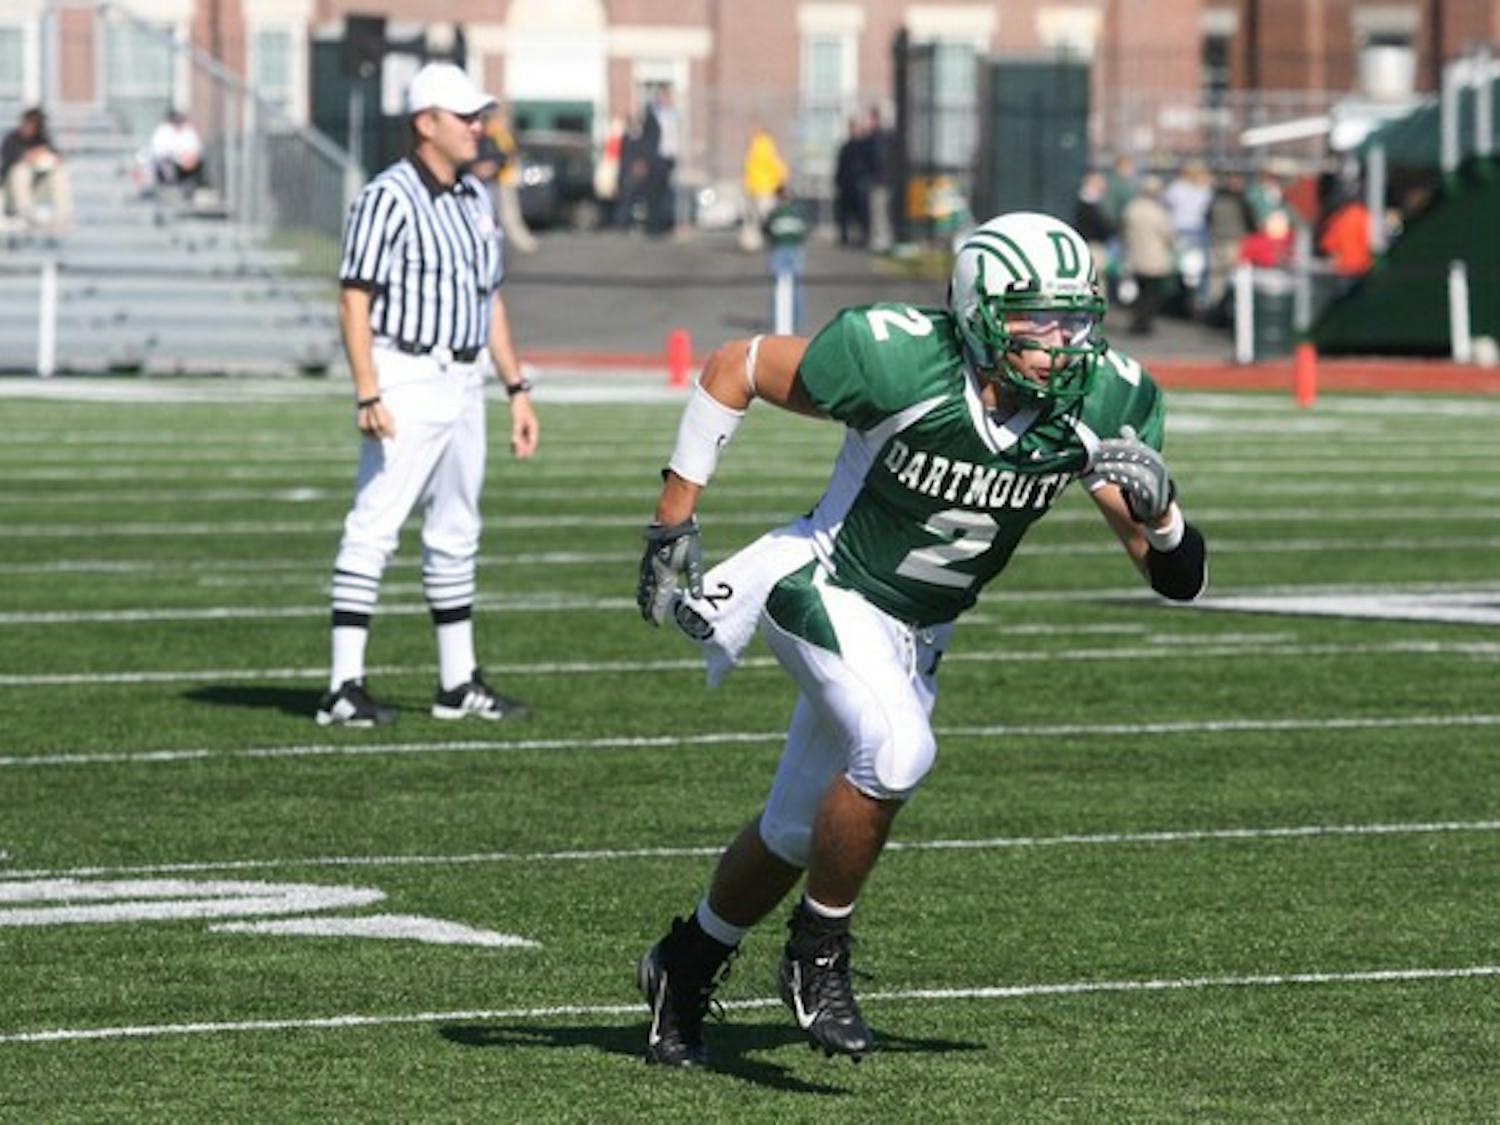 Tim McManus '11 was all over the field for Dartmouth Saturday, gaining yards passing, rushing and receiving.